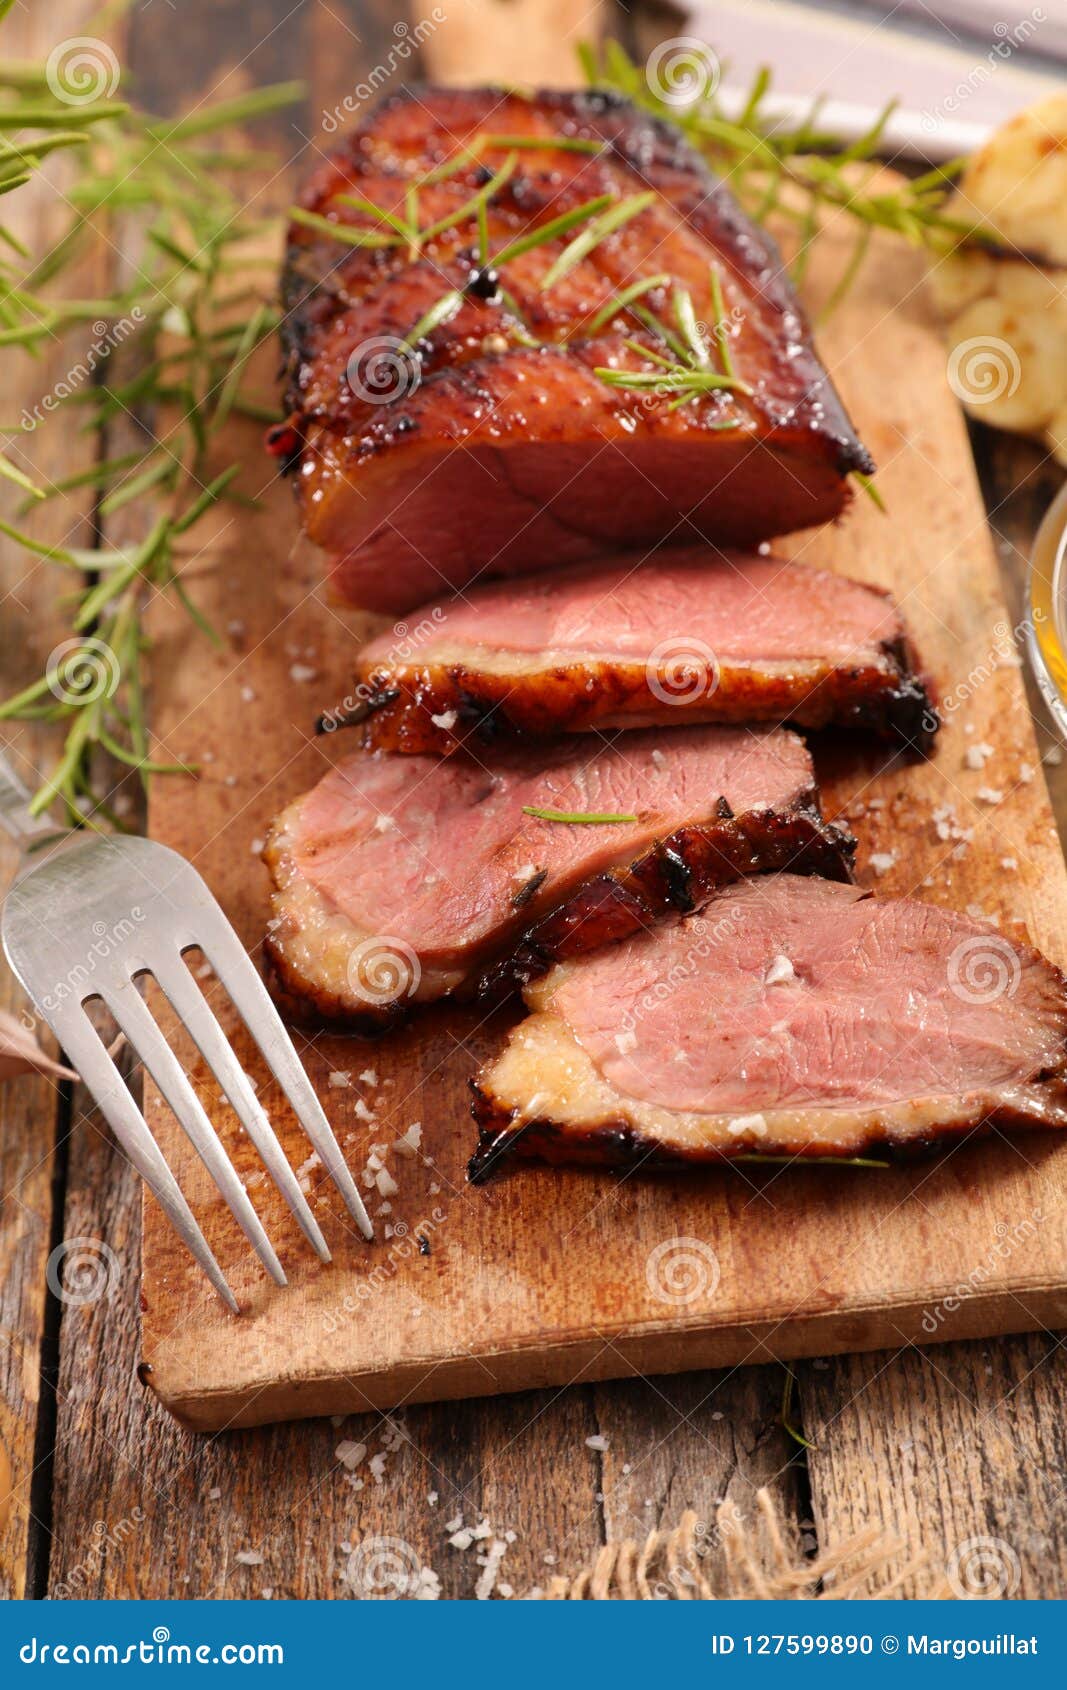 Grilled duck breast stock photo. Image of french, wood - 127599890